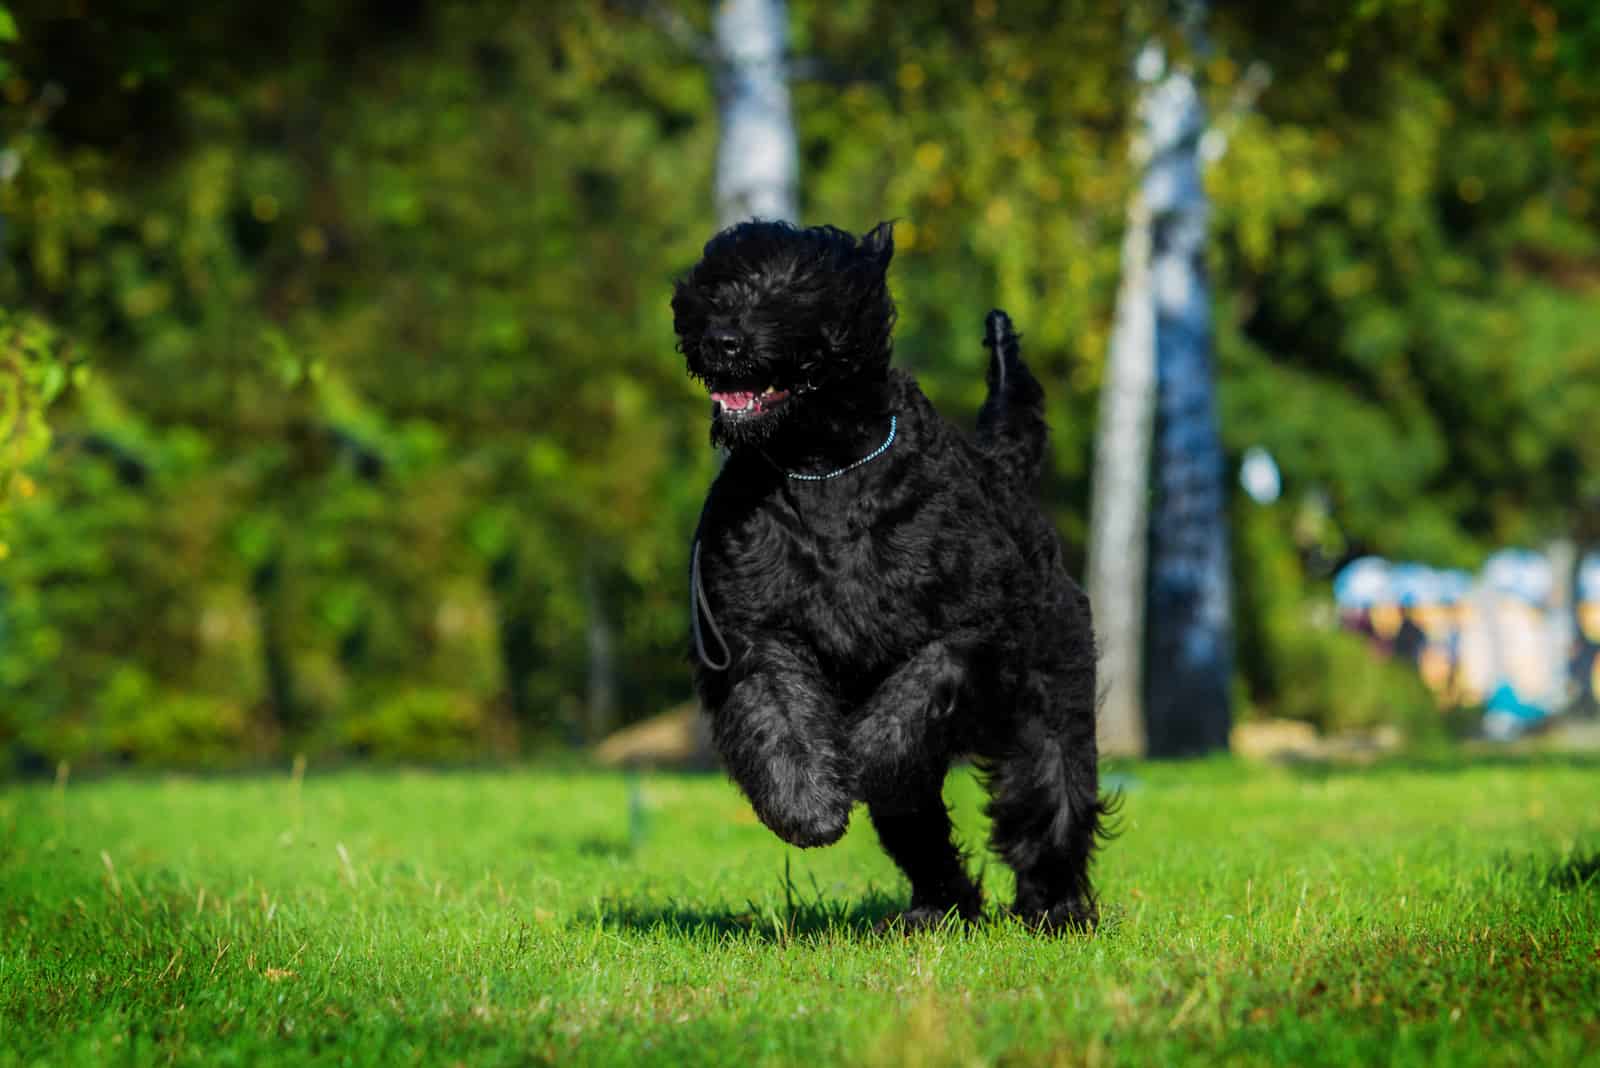 Black Russian Terrier running in the park